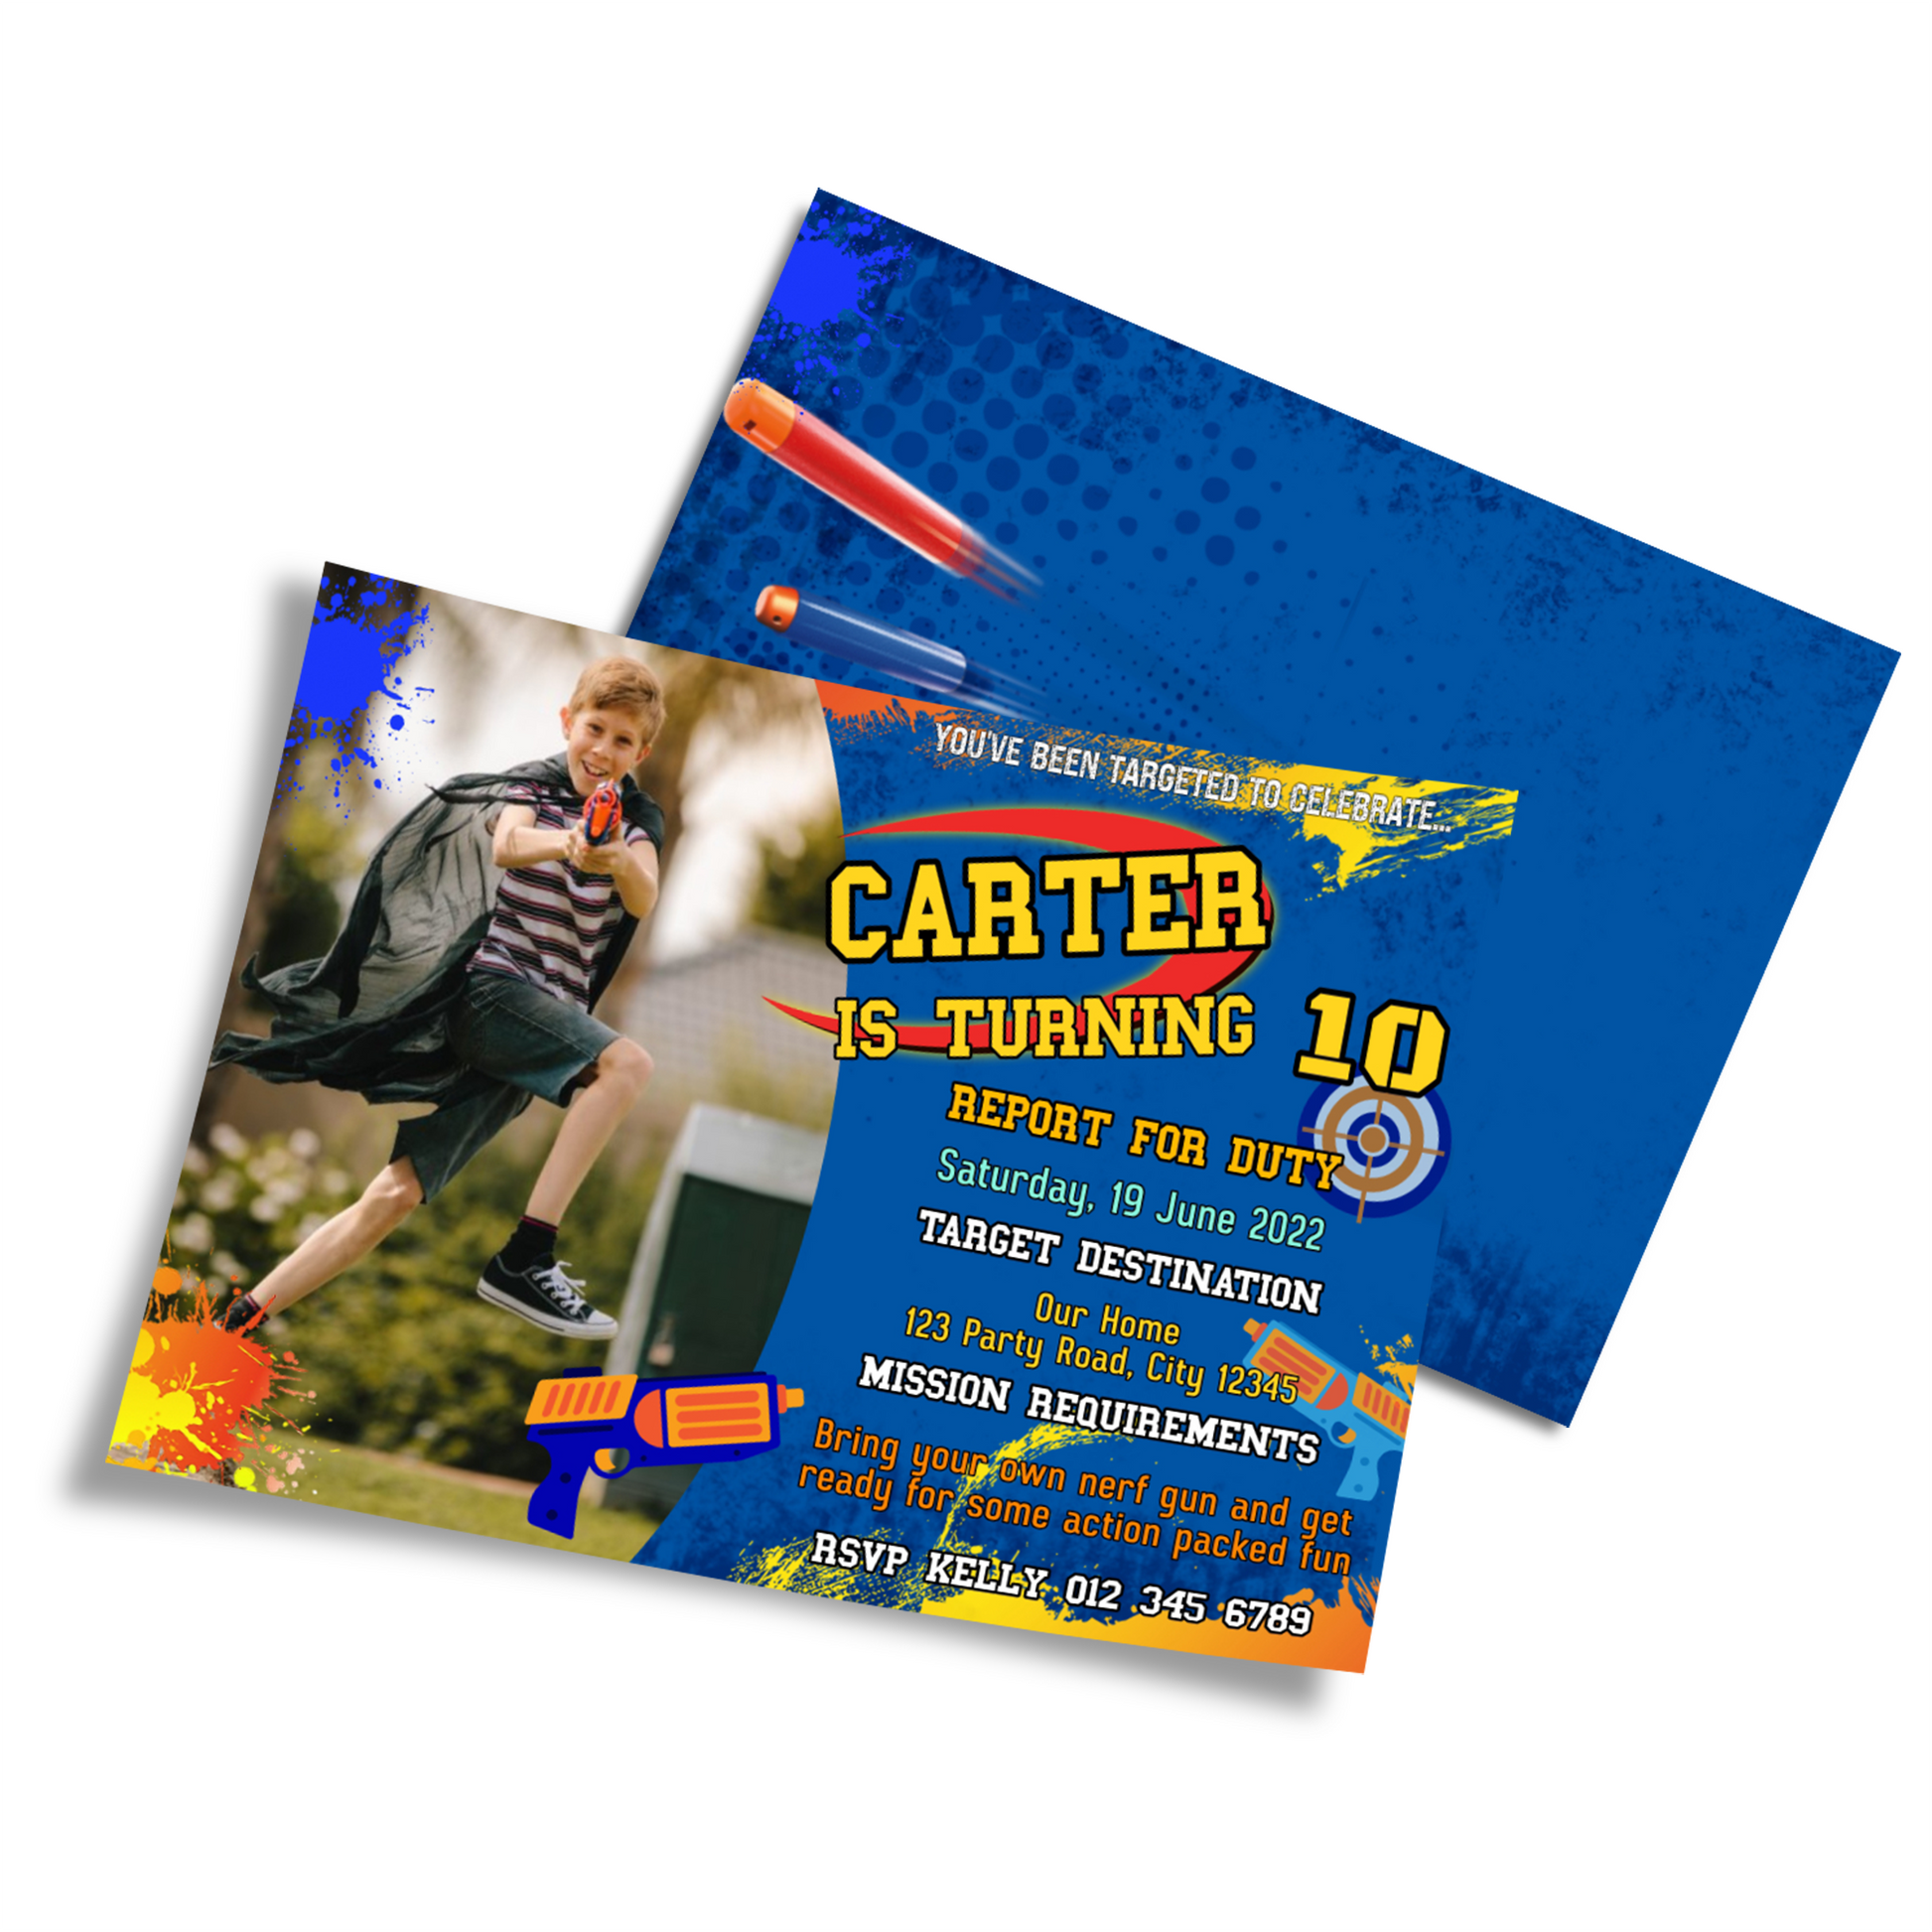 Personalized photo card invitations with a Nerf theme, making your invitations unique.